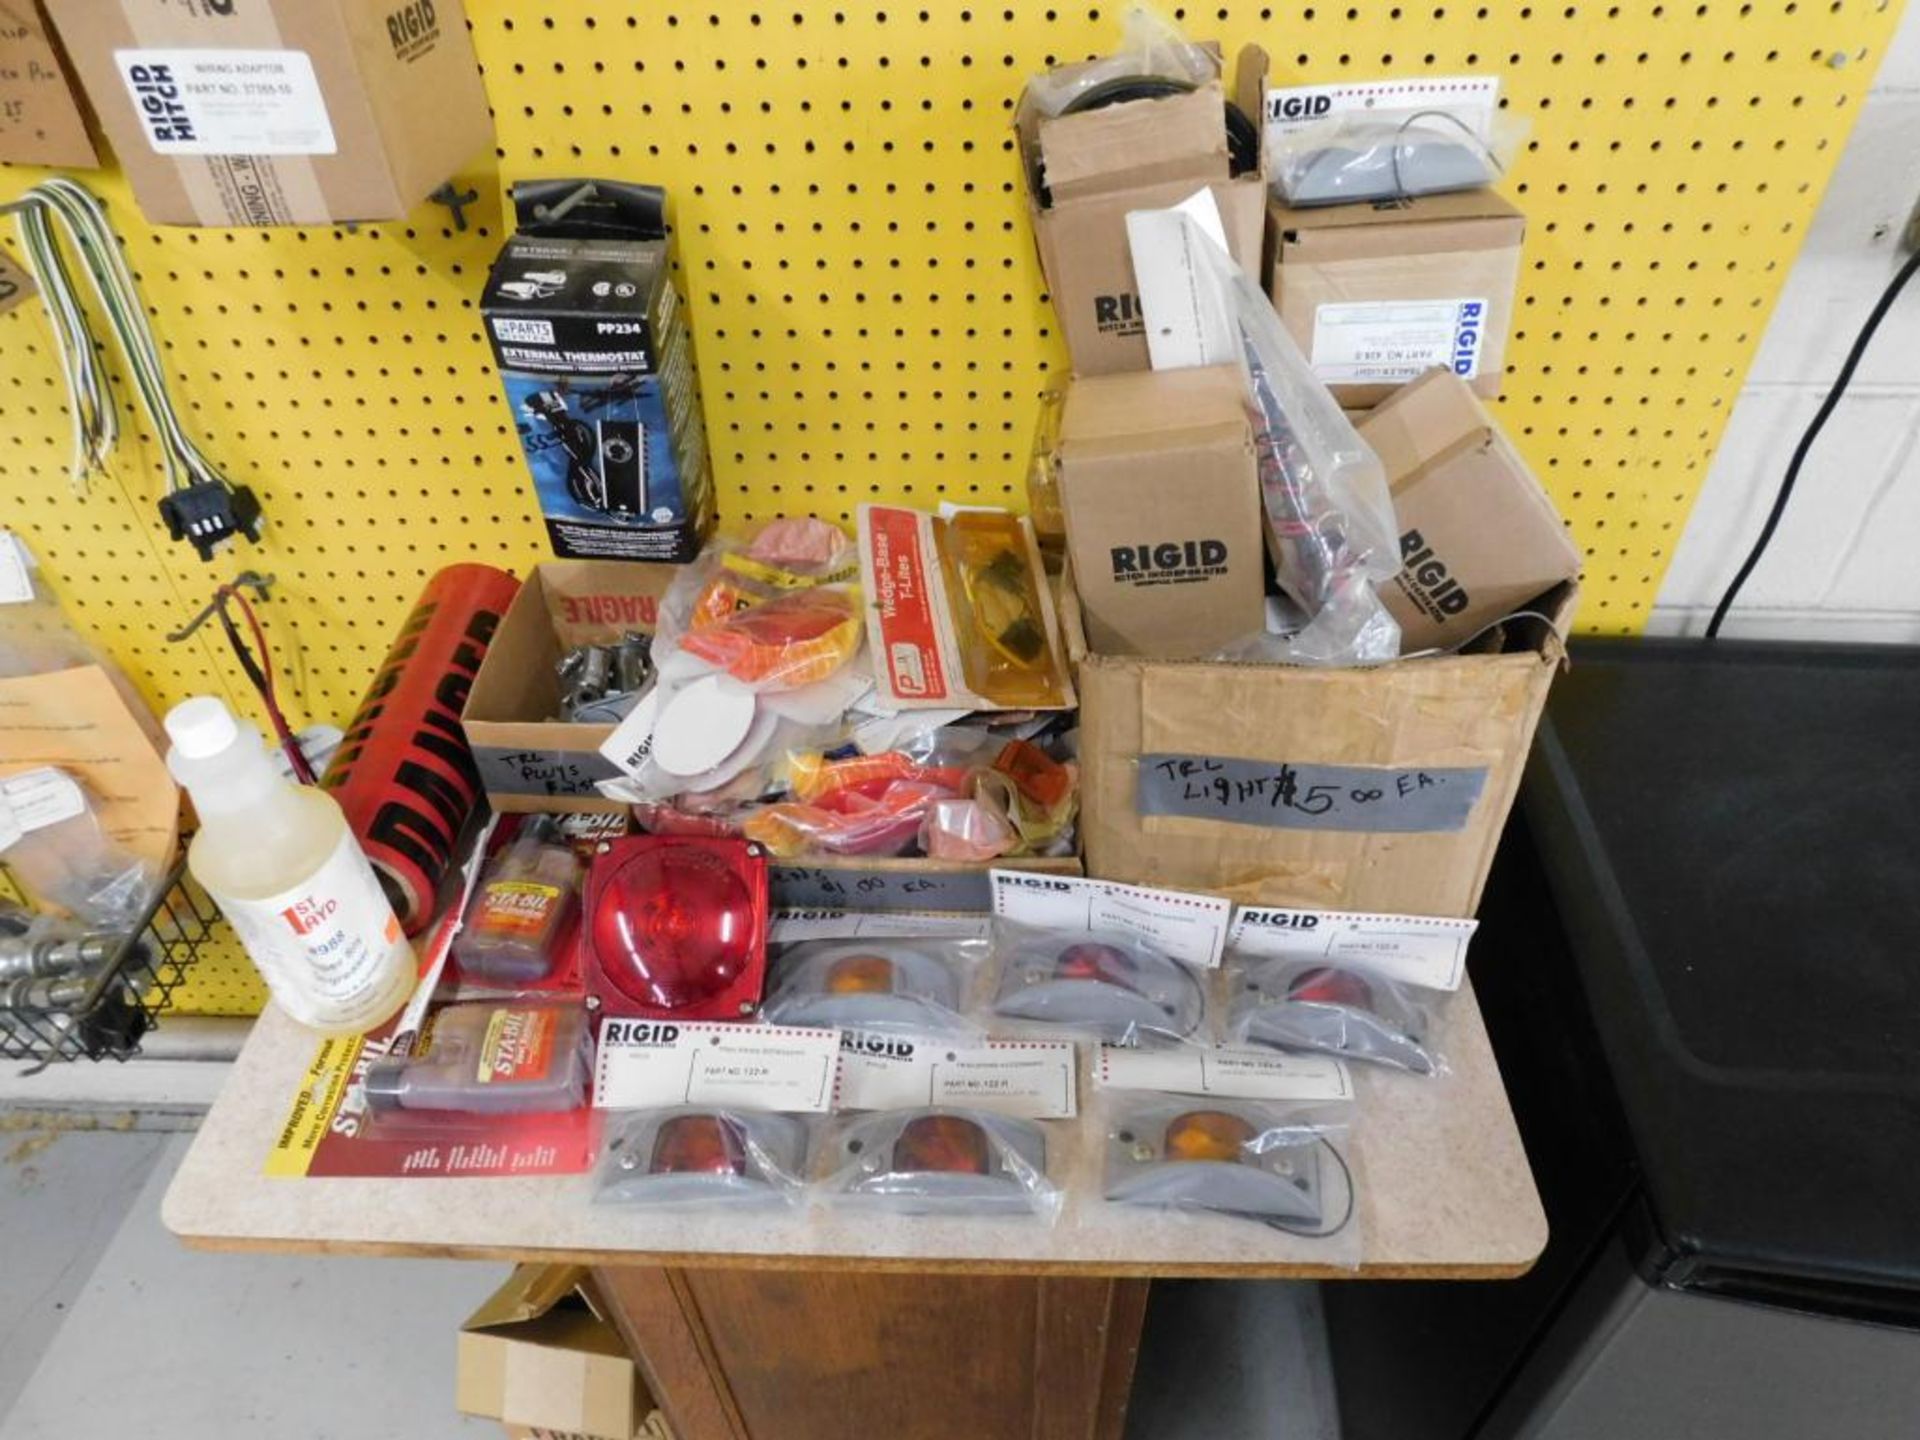 LOT: Assorted Trailer Lights & Accessories, Hitches, Ball Hitches, Pins, Light Adaptors, Plugs, etc.